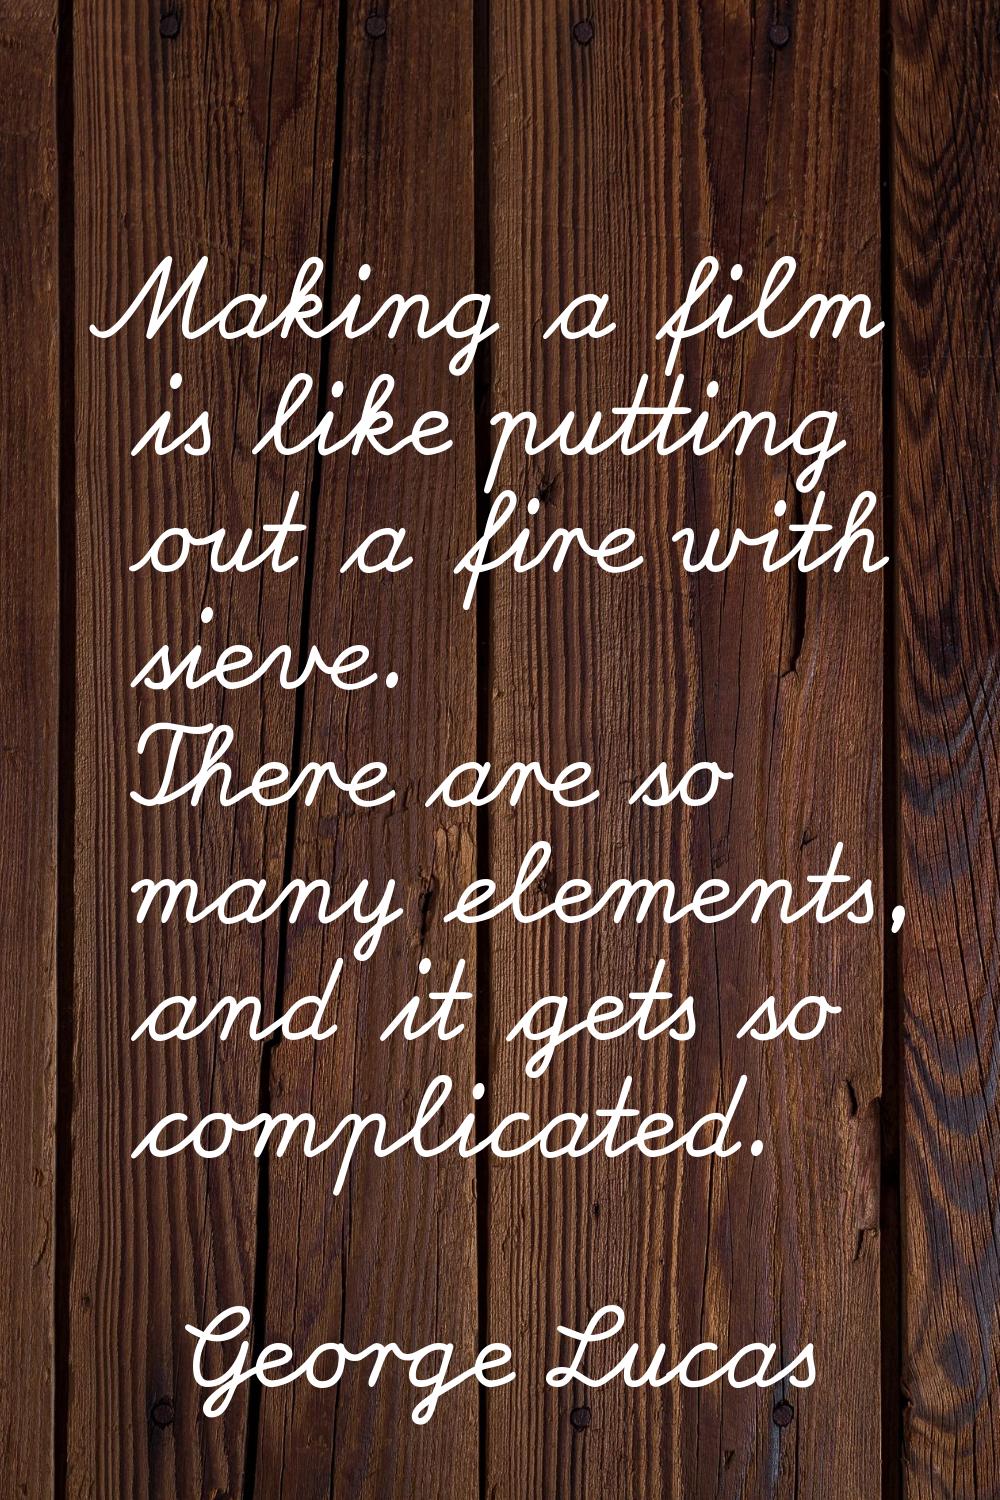 Making a film is like putting out a fire with sieve. There are so many elements, and it gets so com